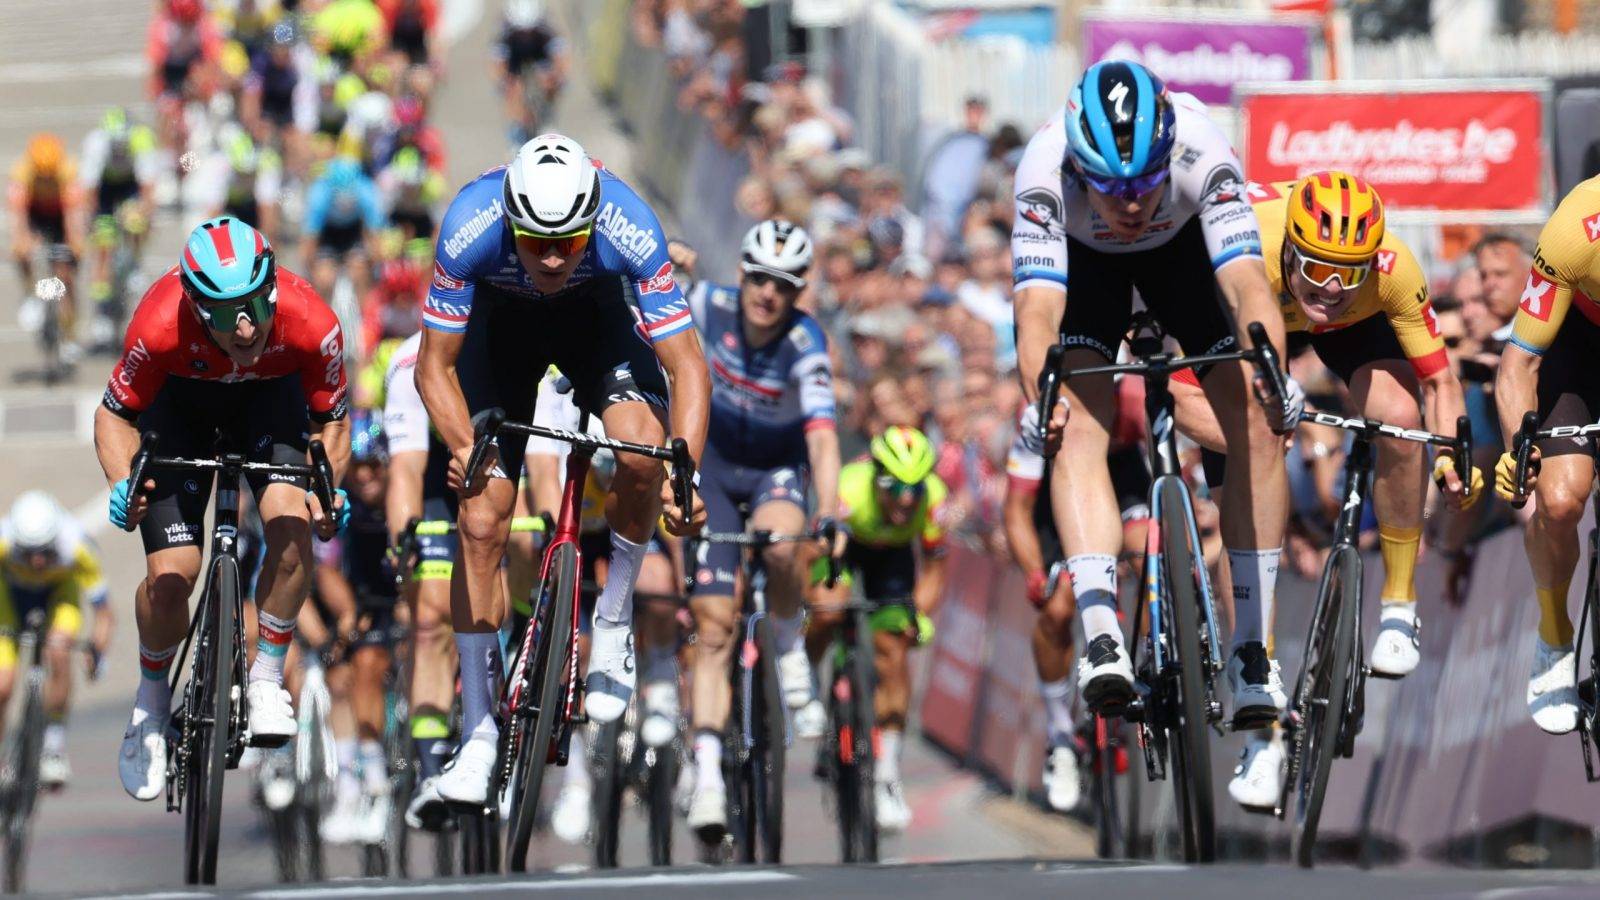 Dutch Mathieu van der Poel of Alpecin-Deceuninck and Dutch Fabio Jakobsen of Soudal Quick-Step sprint to the finish of stage 2 of the Baloise Belgium Tour cycling race, from Merelbeke to Knokke-Heist (175,7 km) on Thursday 15 June 2023.
BELGA PHOTO DAVID PINTENS